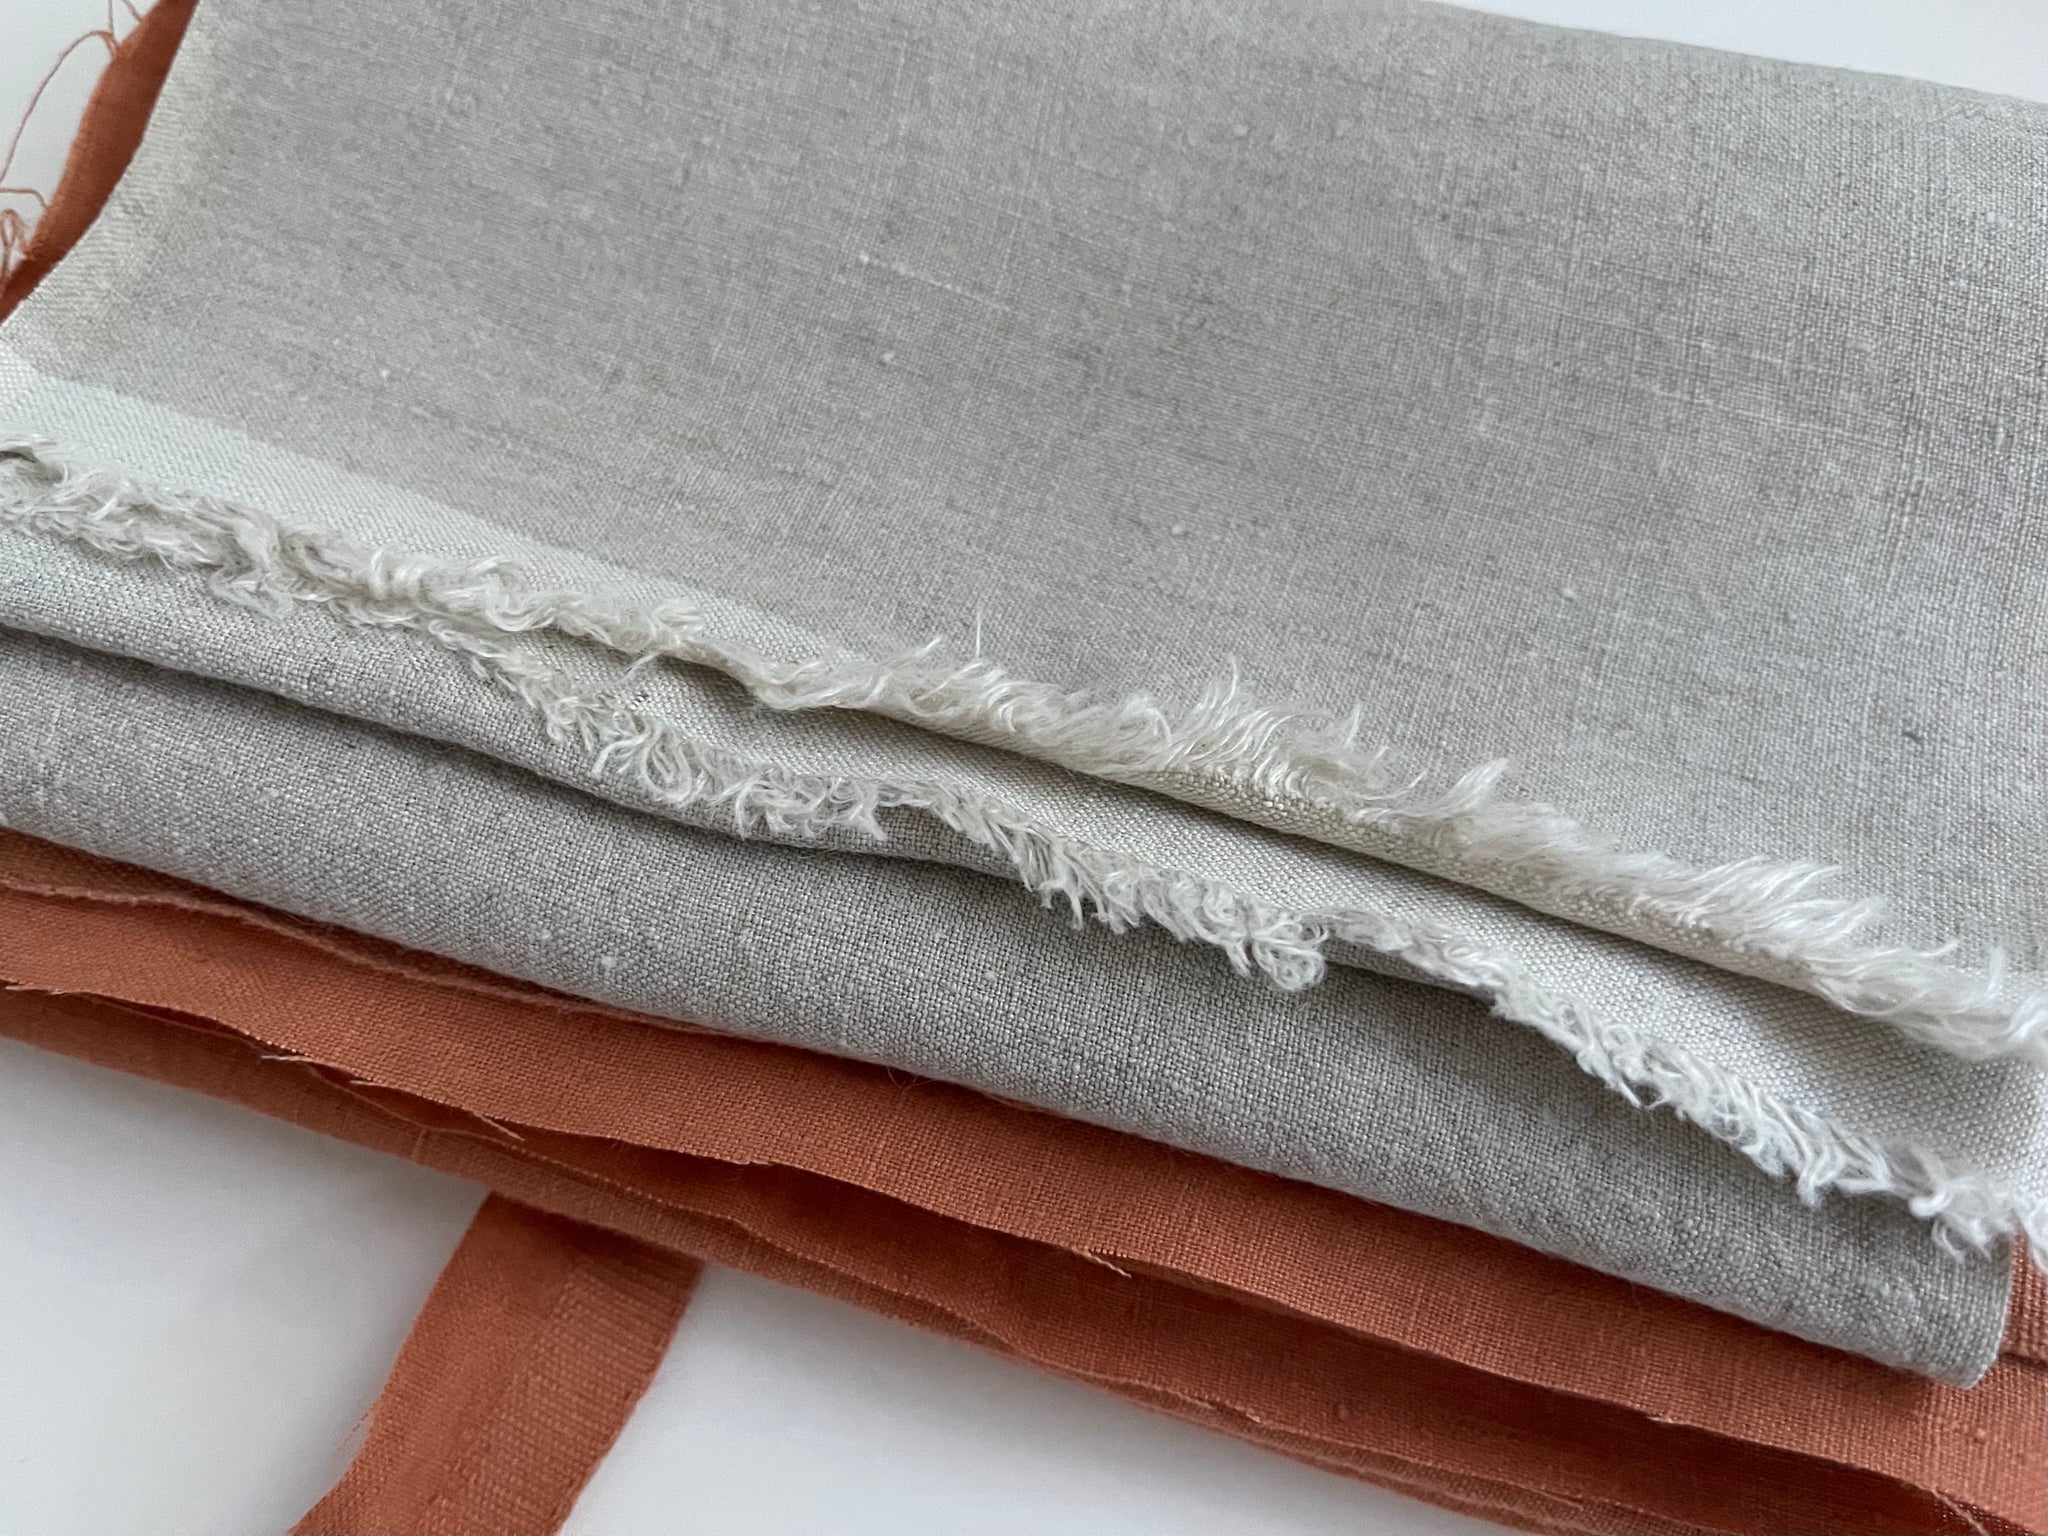 Linen Fabric Remnants - Natural and Terracotta